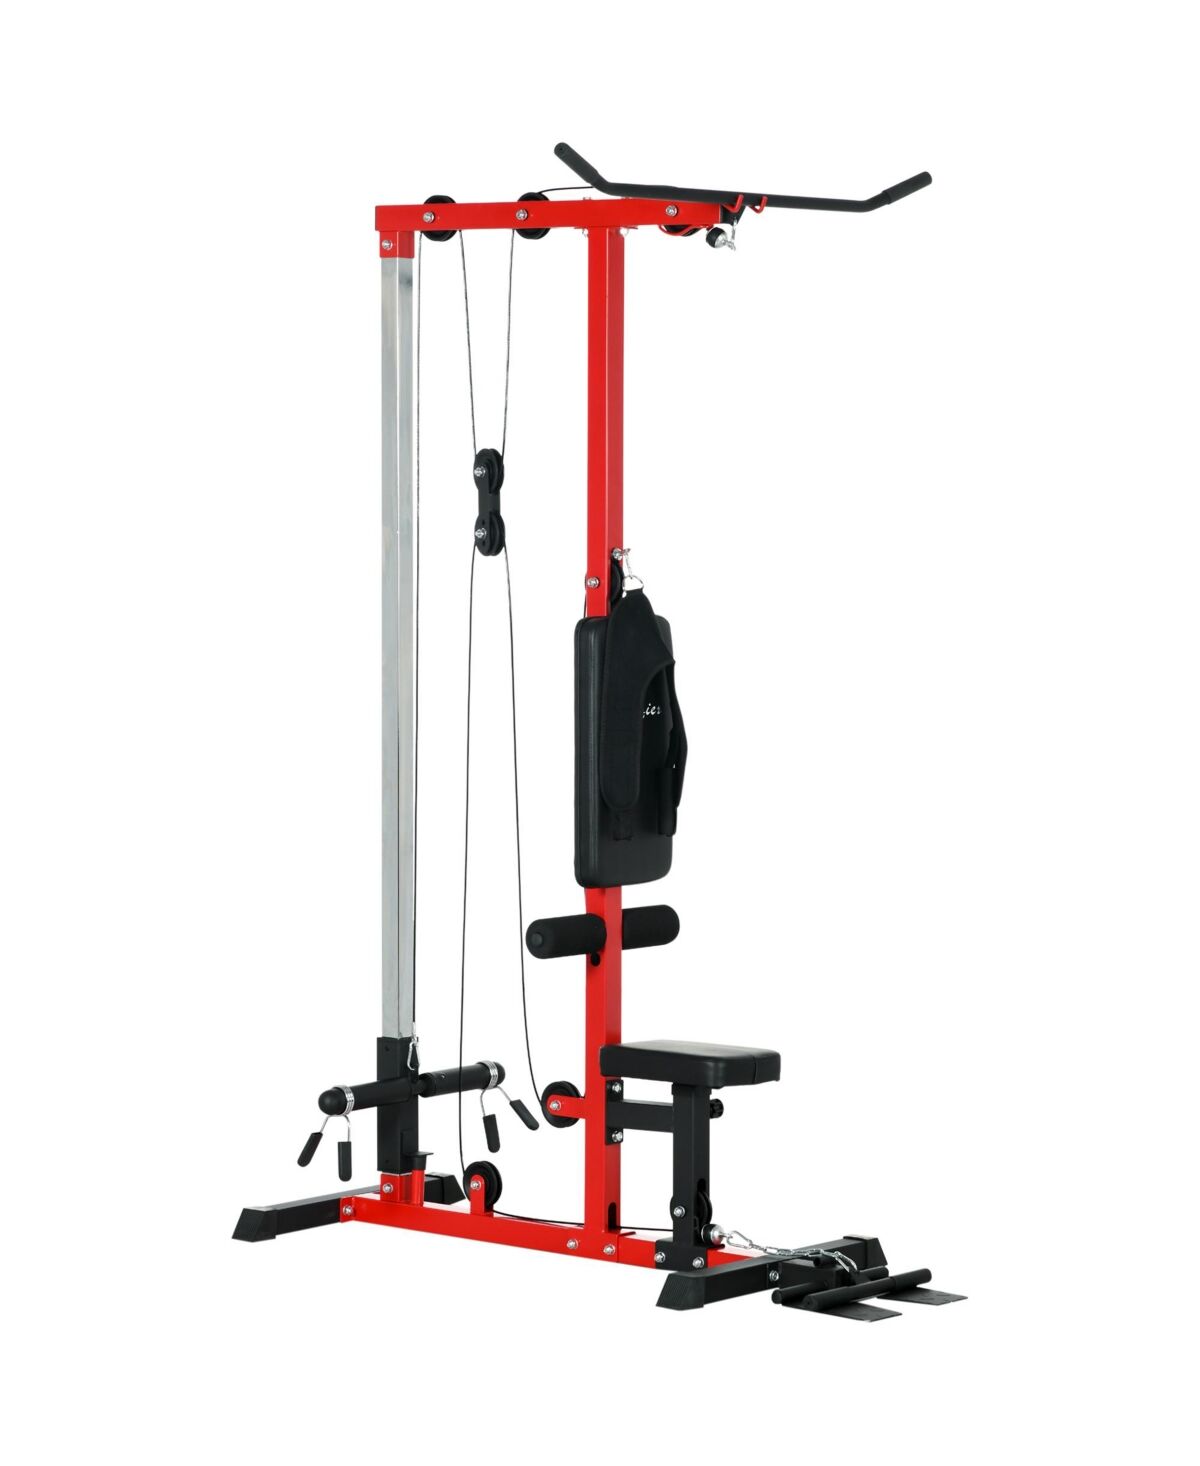 Soozier Cable Machine Lat Pull Down Machines with Flip-Up Footplate - Black and red